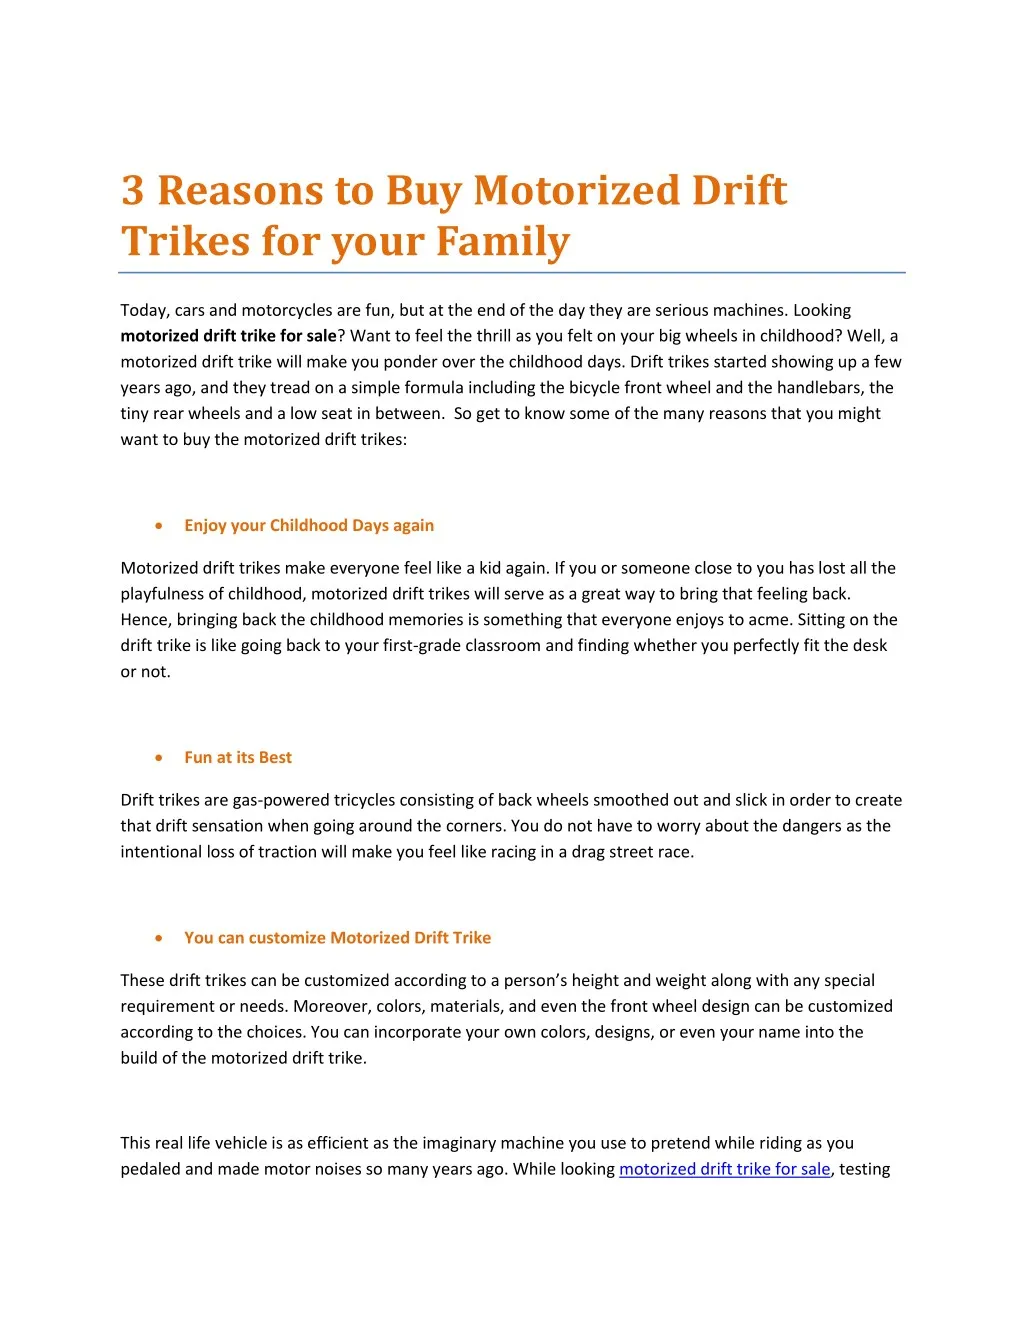 3 reasons to buy motorized drift trikes for your